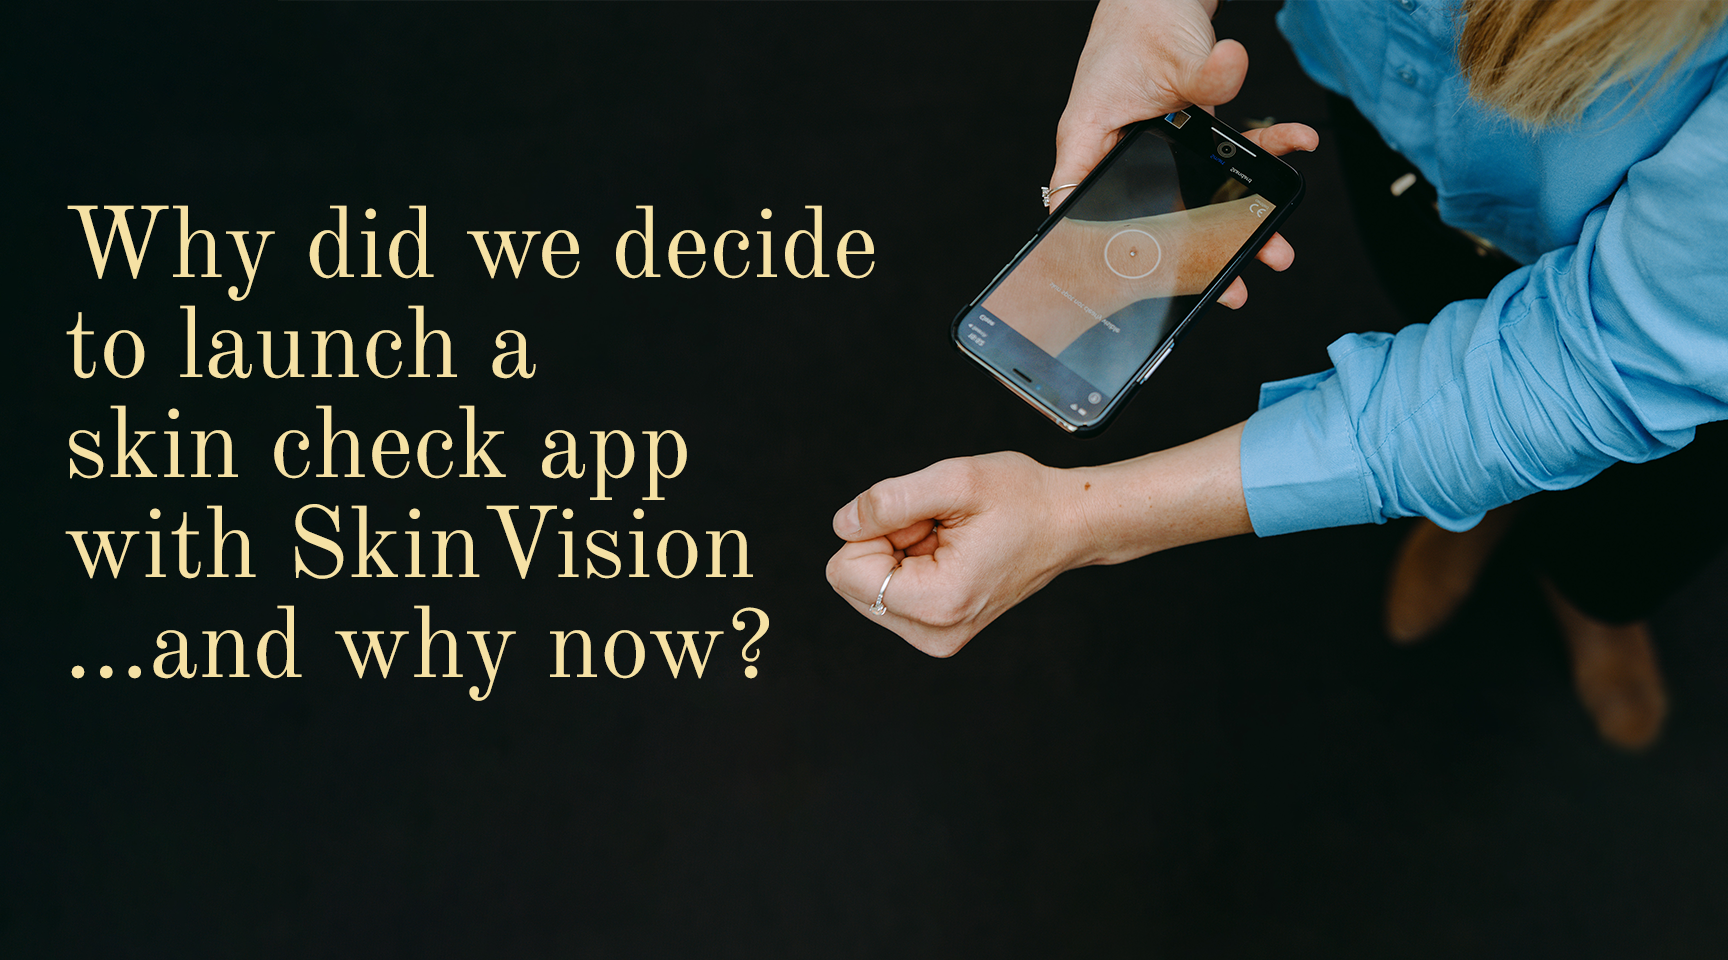 Why did we decide to launch a skin check app with SkinVision and why now?